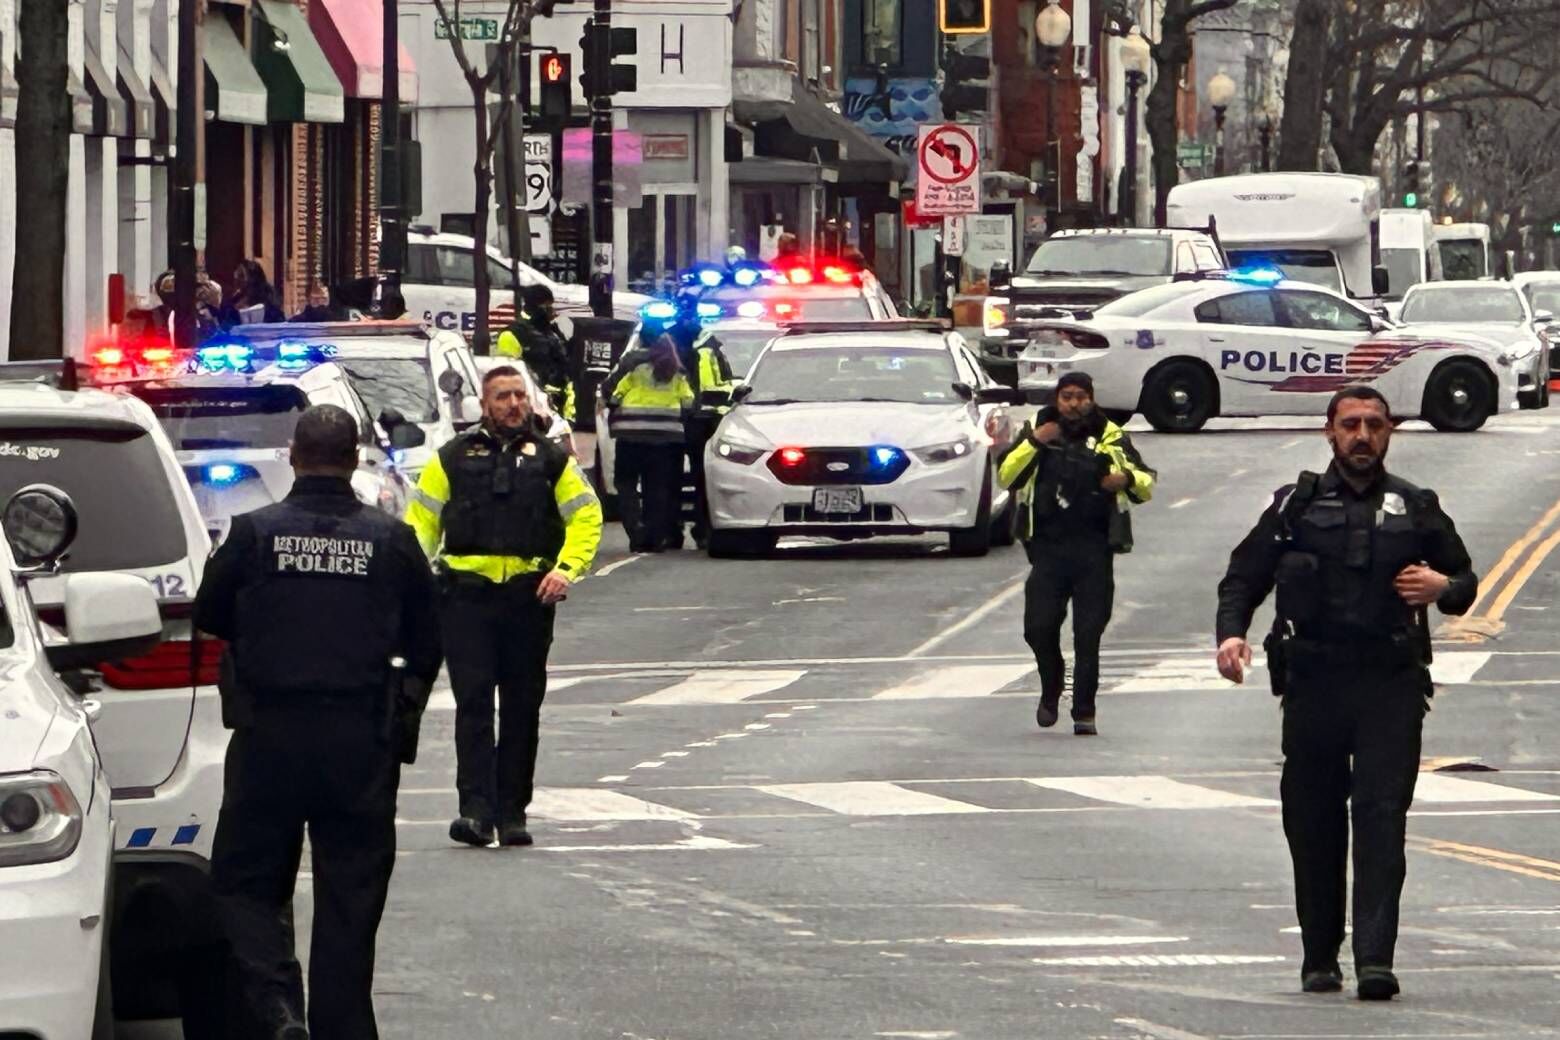 The incident sparked a large police presence and closed some nearby streets, including part of Georgia Avenue and Florida Avenue.  (WTOP/Jimmy Alexander)